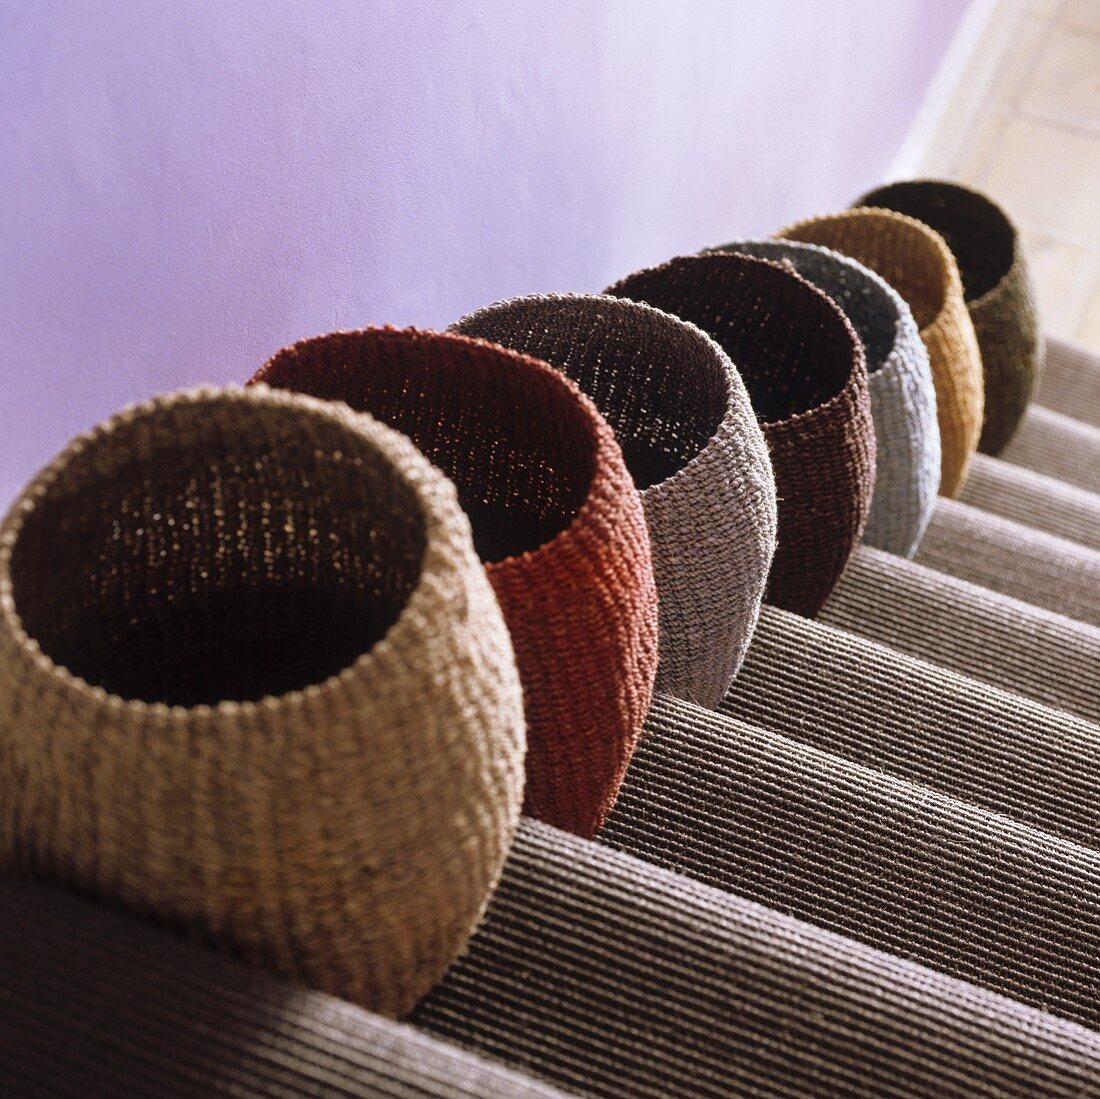 Various coloured sisal baskets on a flight of stairs with a carpet runner